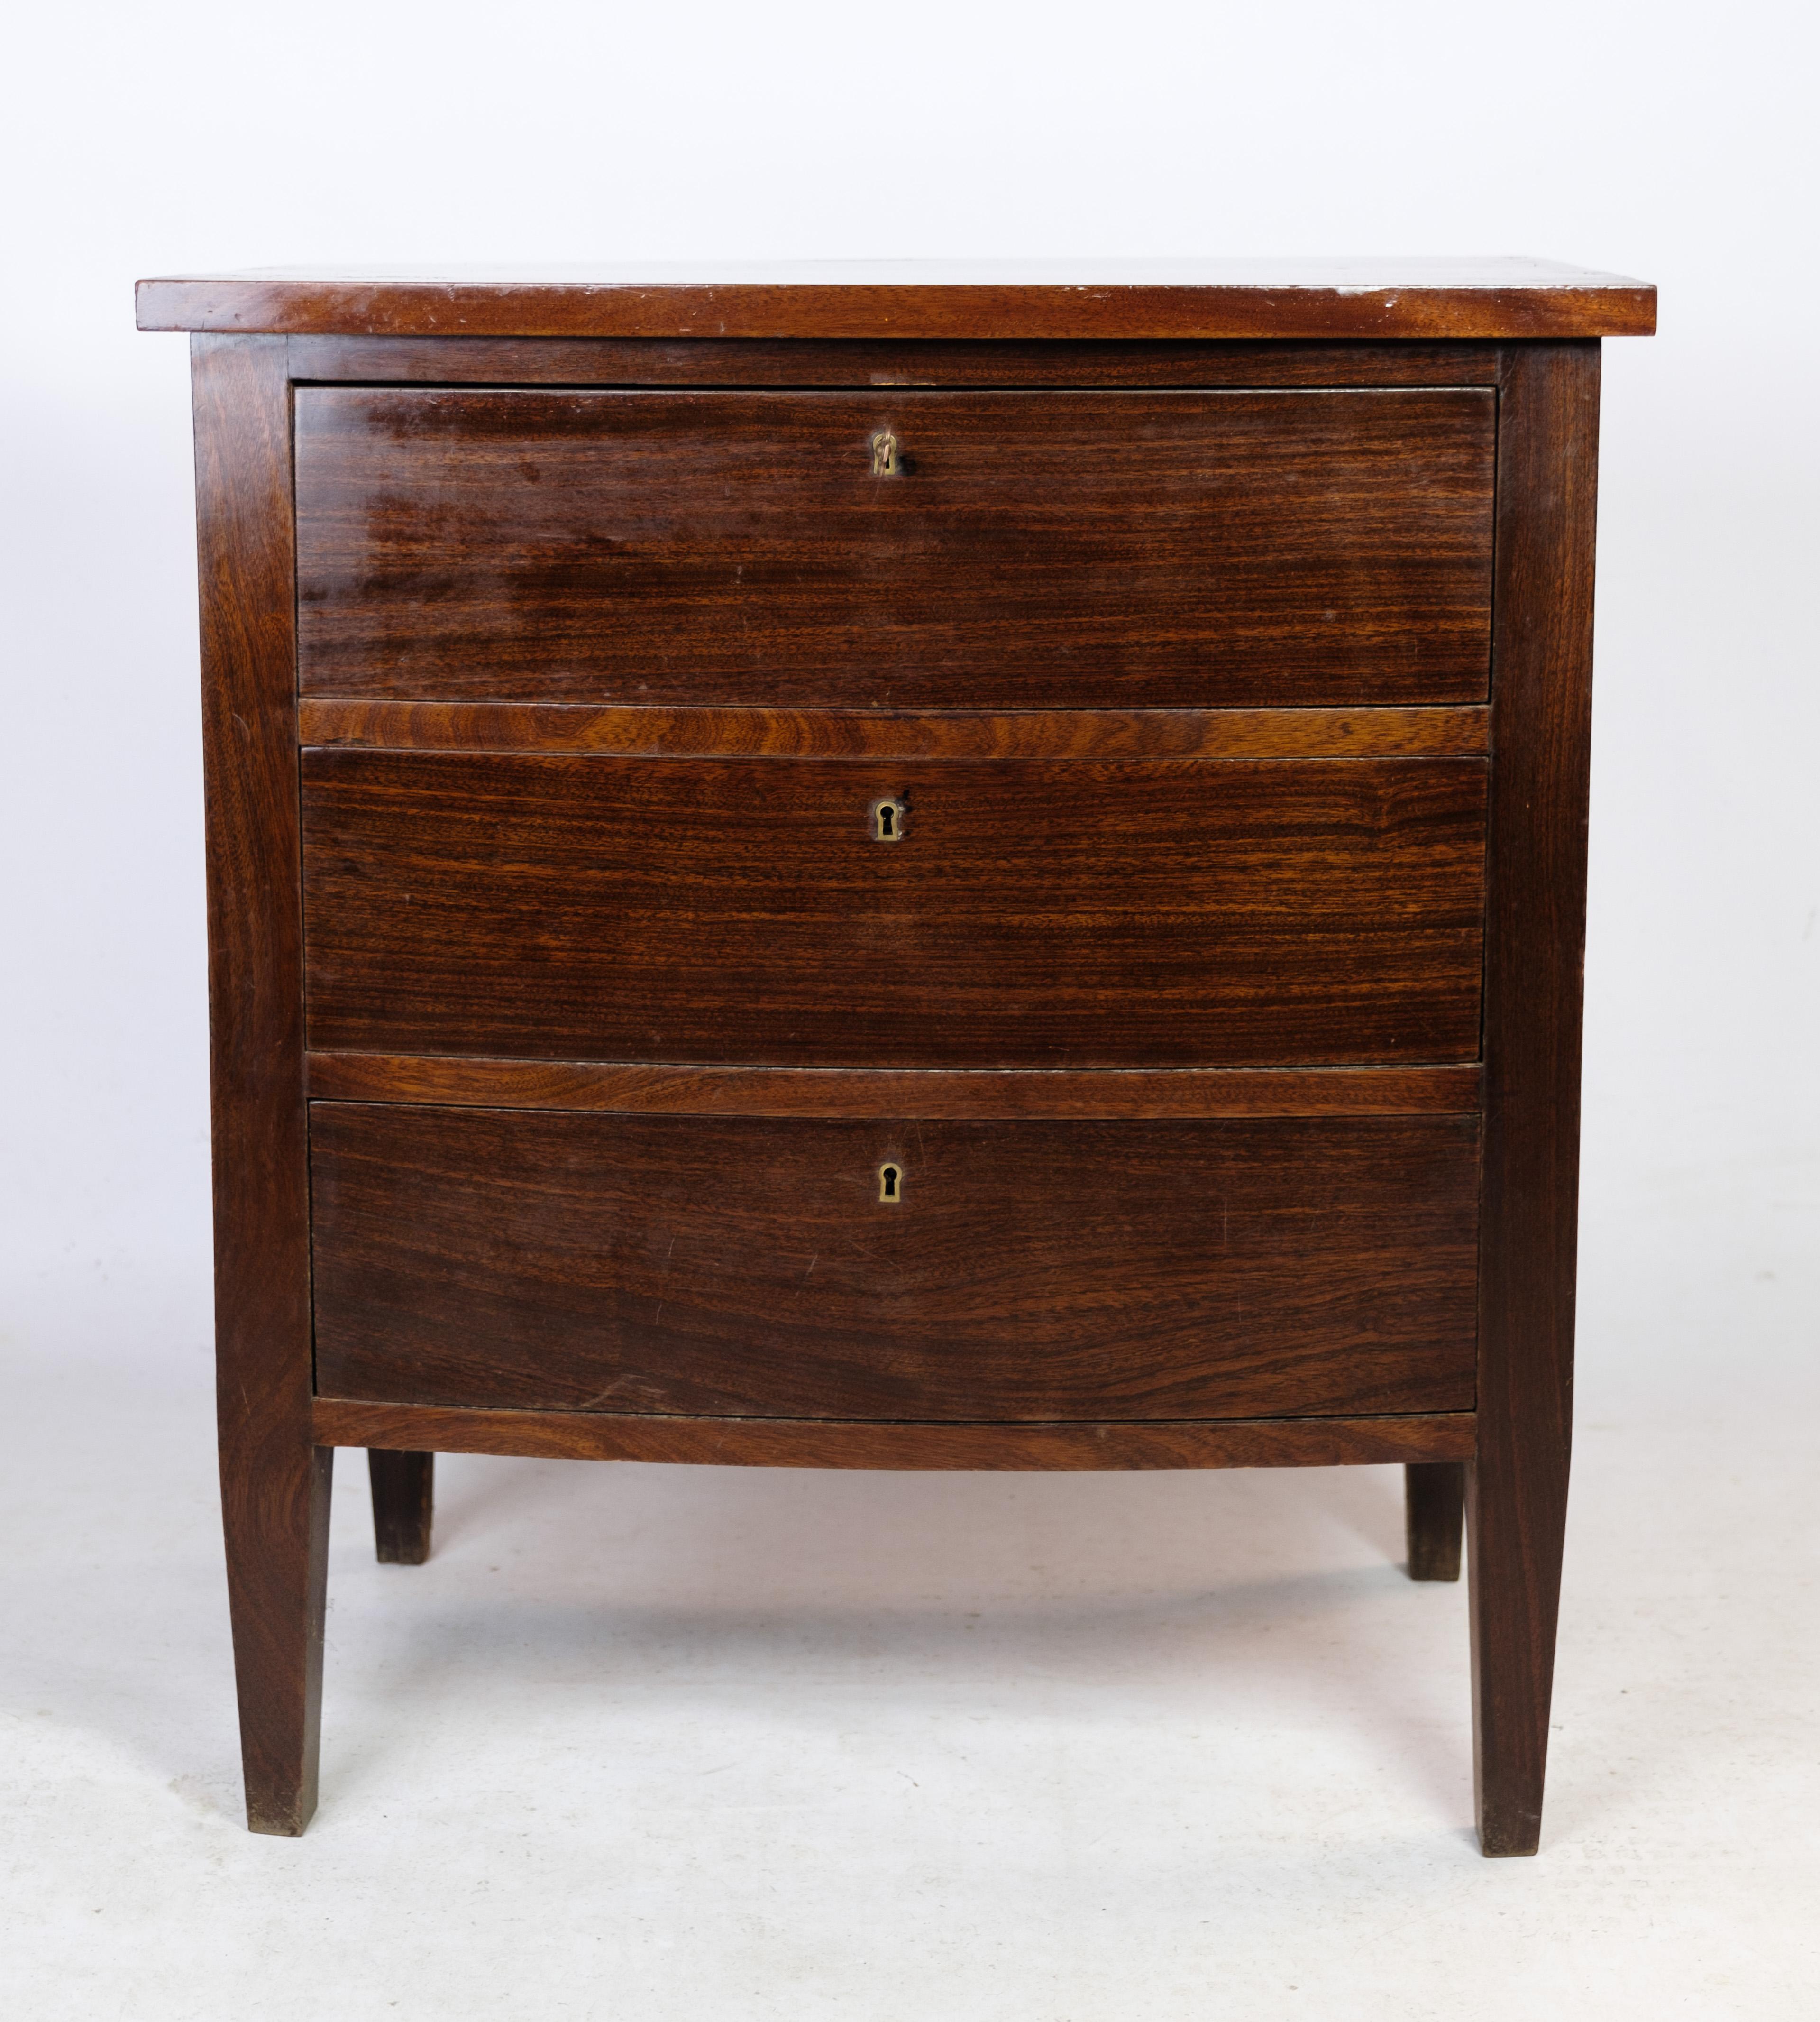 Curved Chest of Drawers, Mahogany, Three Drawers, 1890 For Sale 2